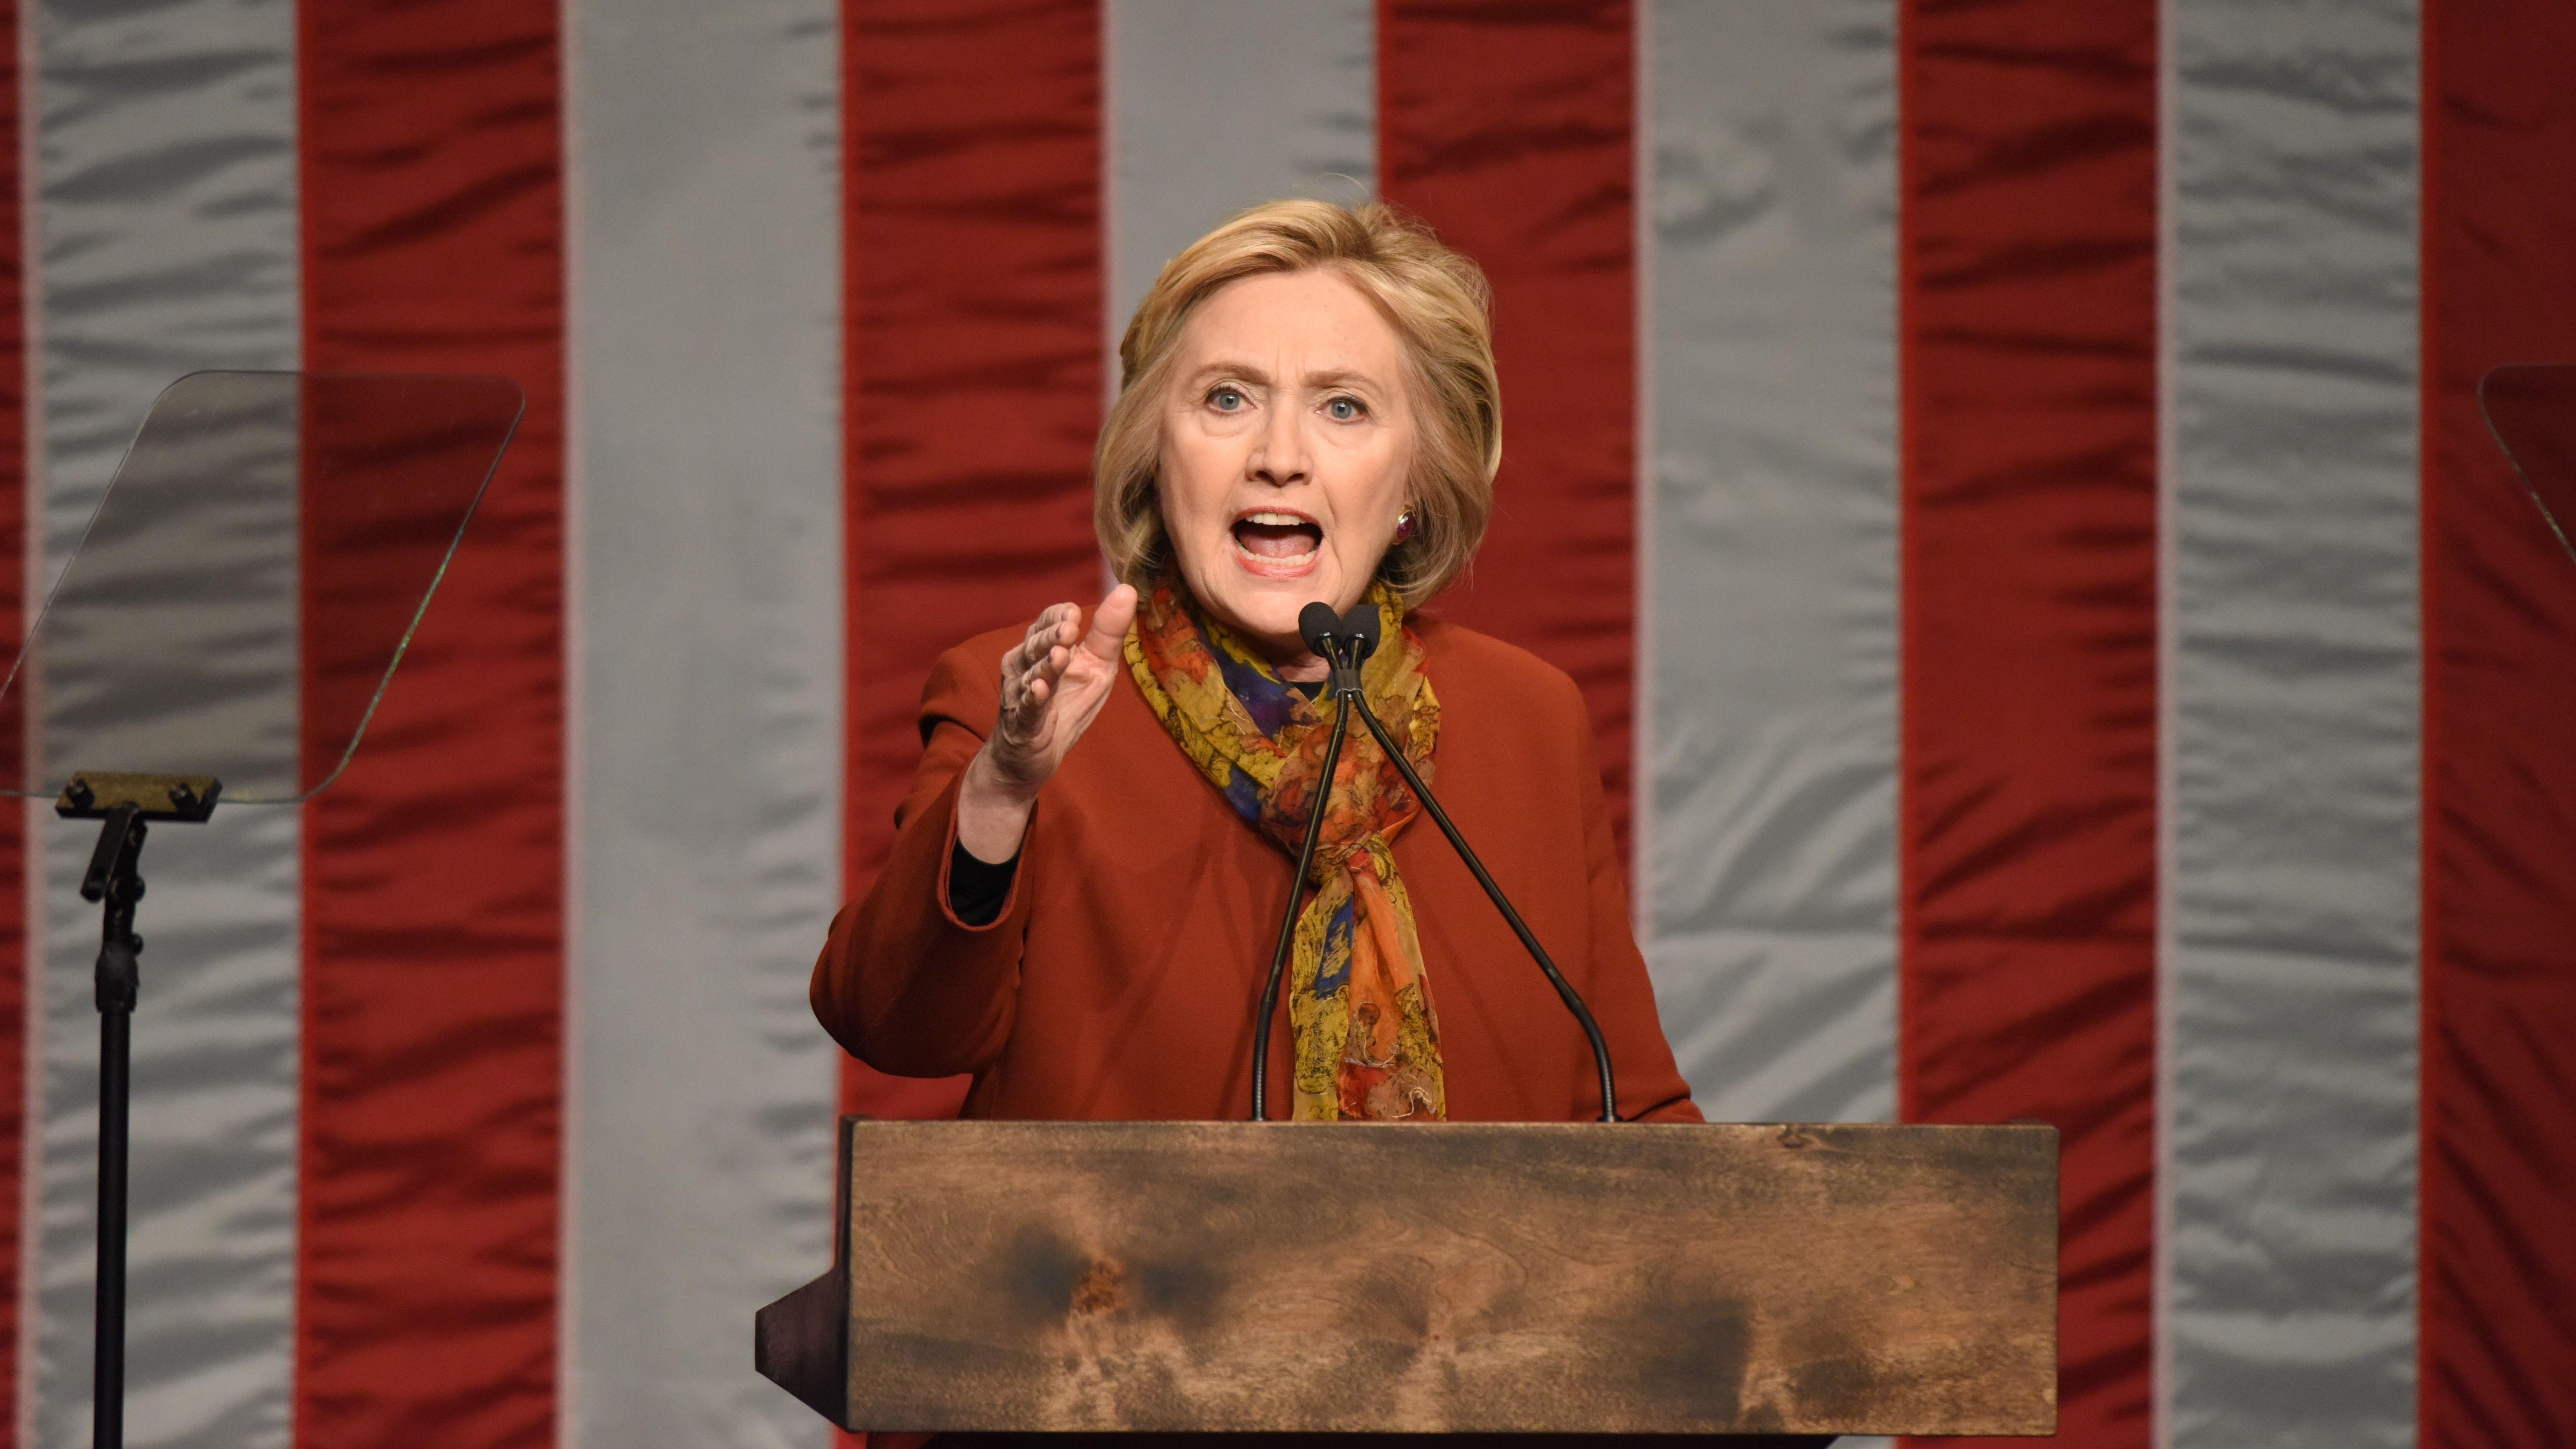 Former Secretary of State Hillary Clinton delivers a speech